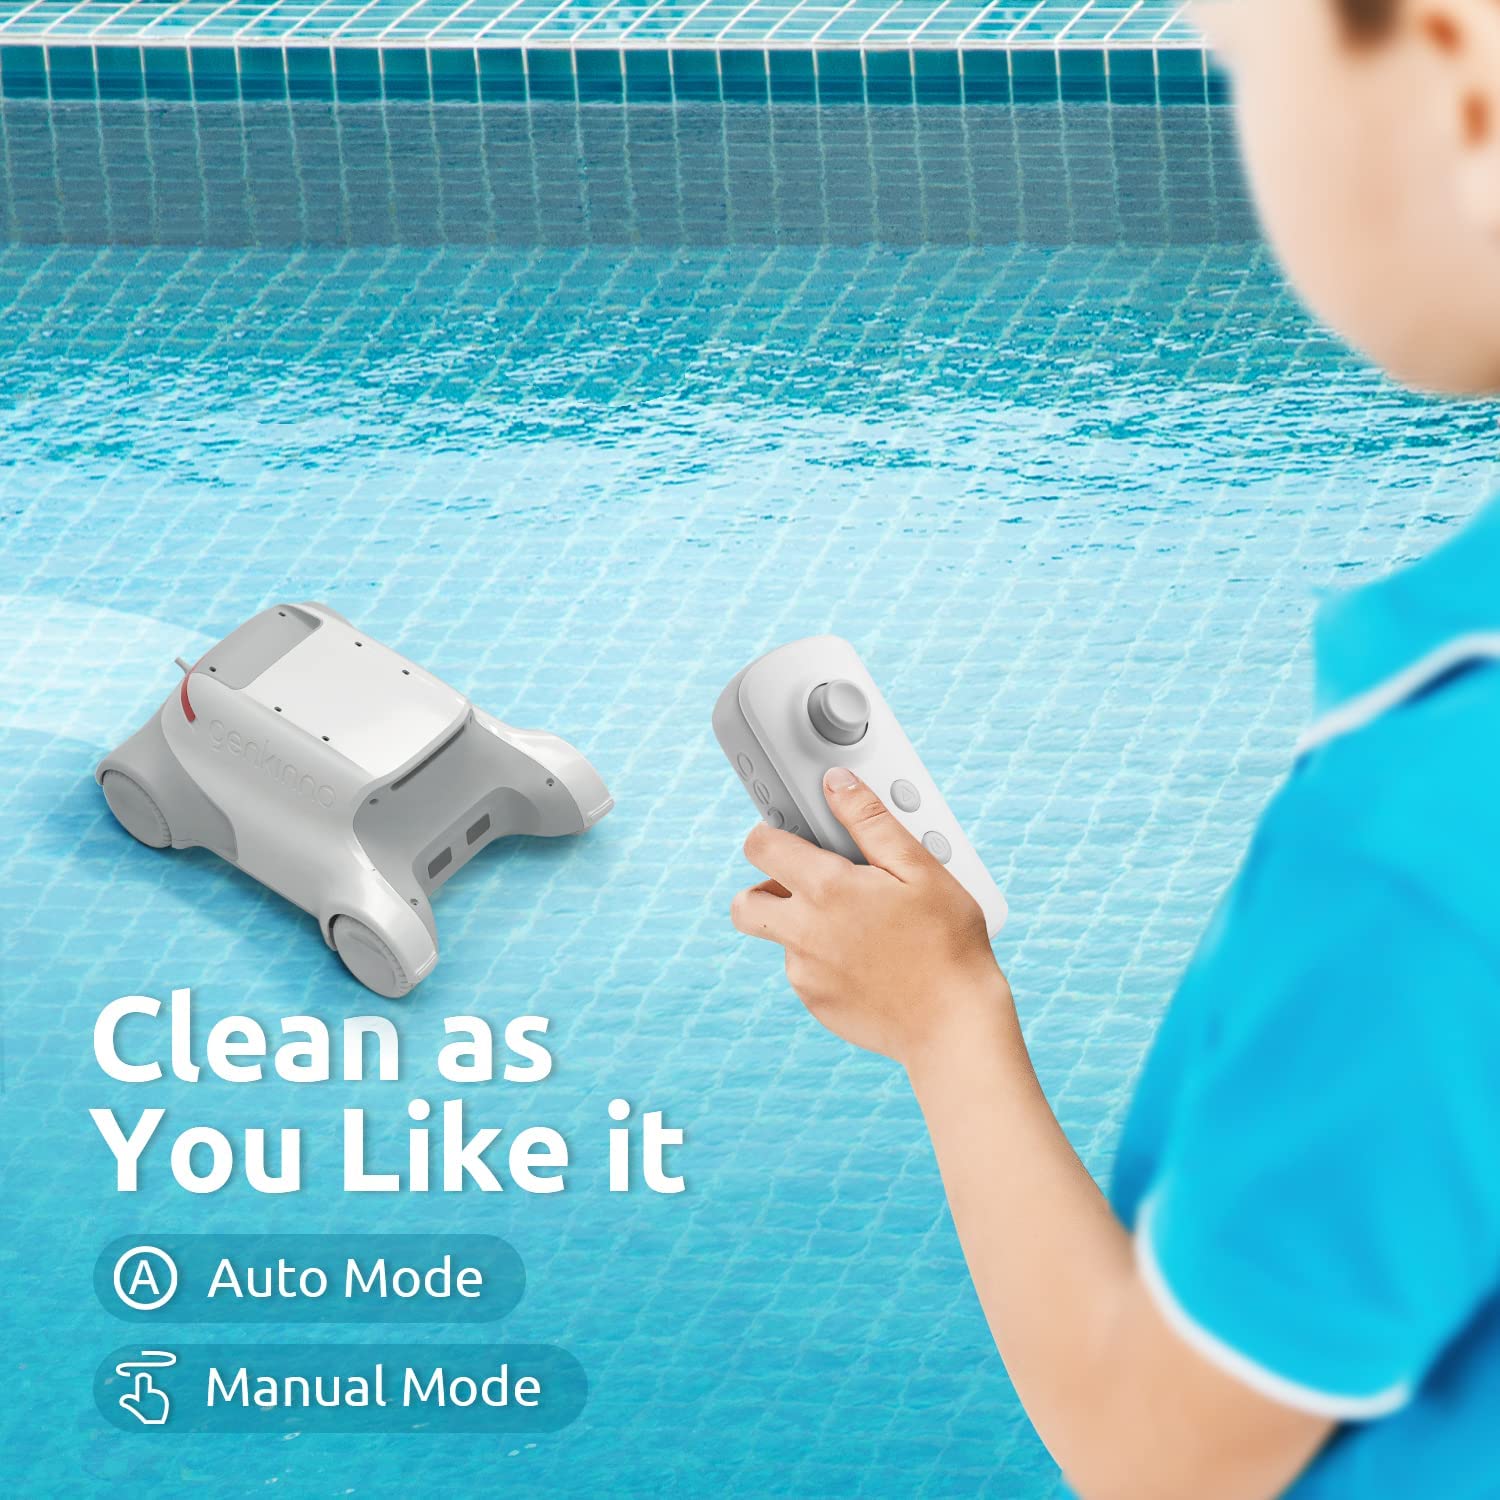 Genkinno P1 Cordless Automatic Robotic Pool Cleaner with Remote Controller for Above/In-Ground Flat Pools up to 1614 sq. ft.